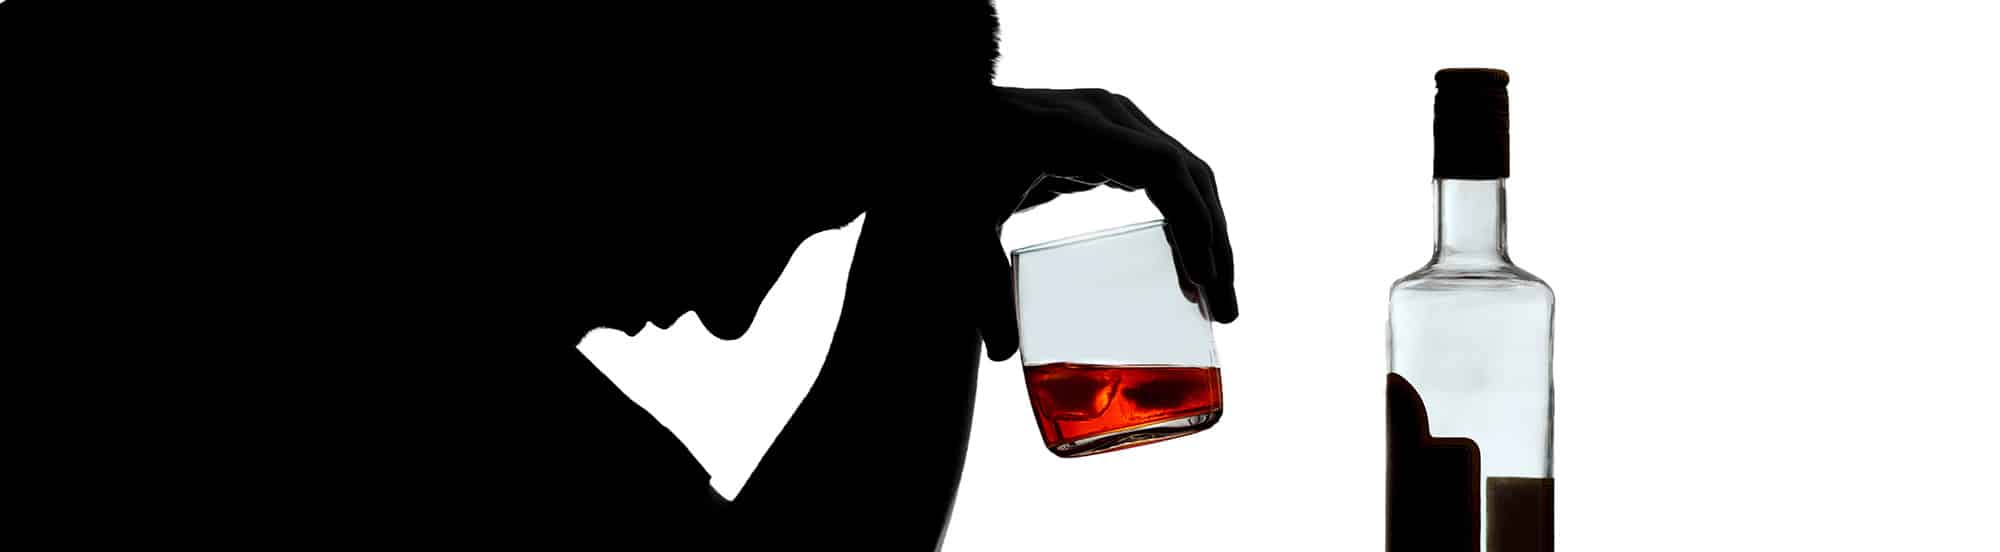 black side profile of person with head on hand and glass of whiskey in hand and bottle of liquor nearby needing alcohol treatment